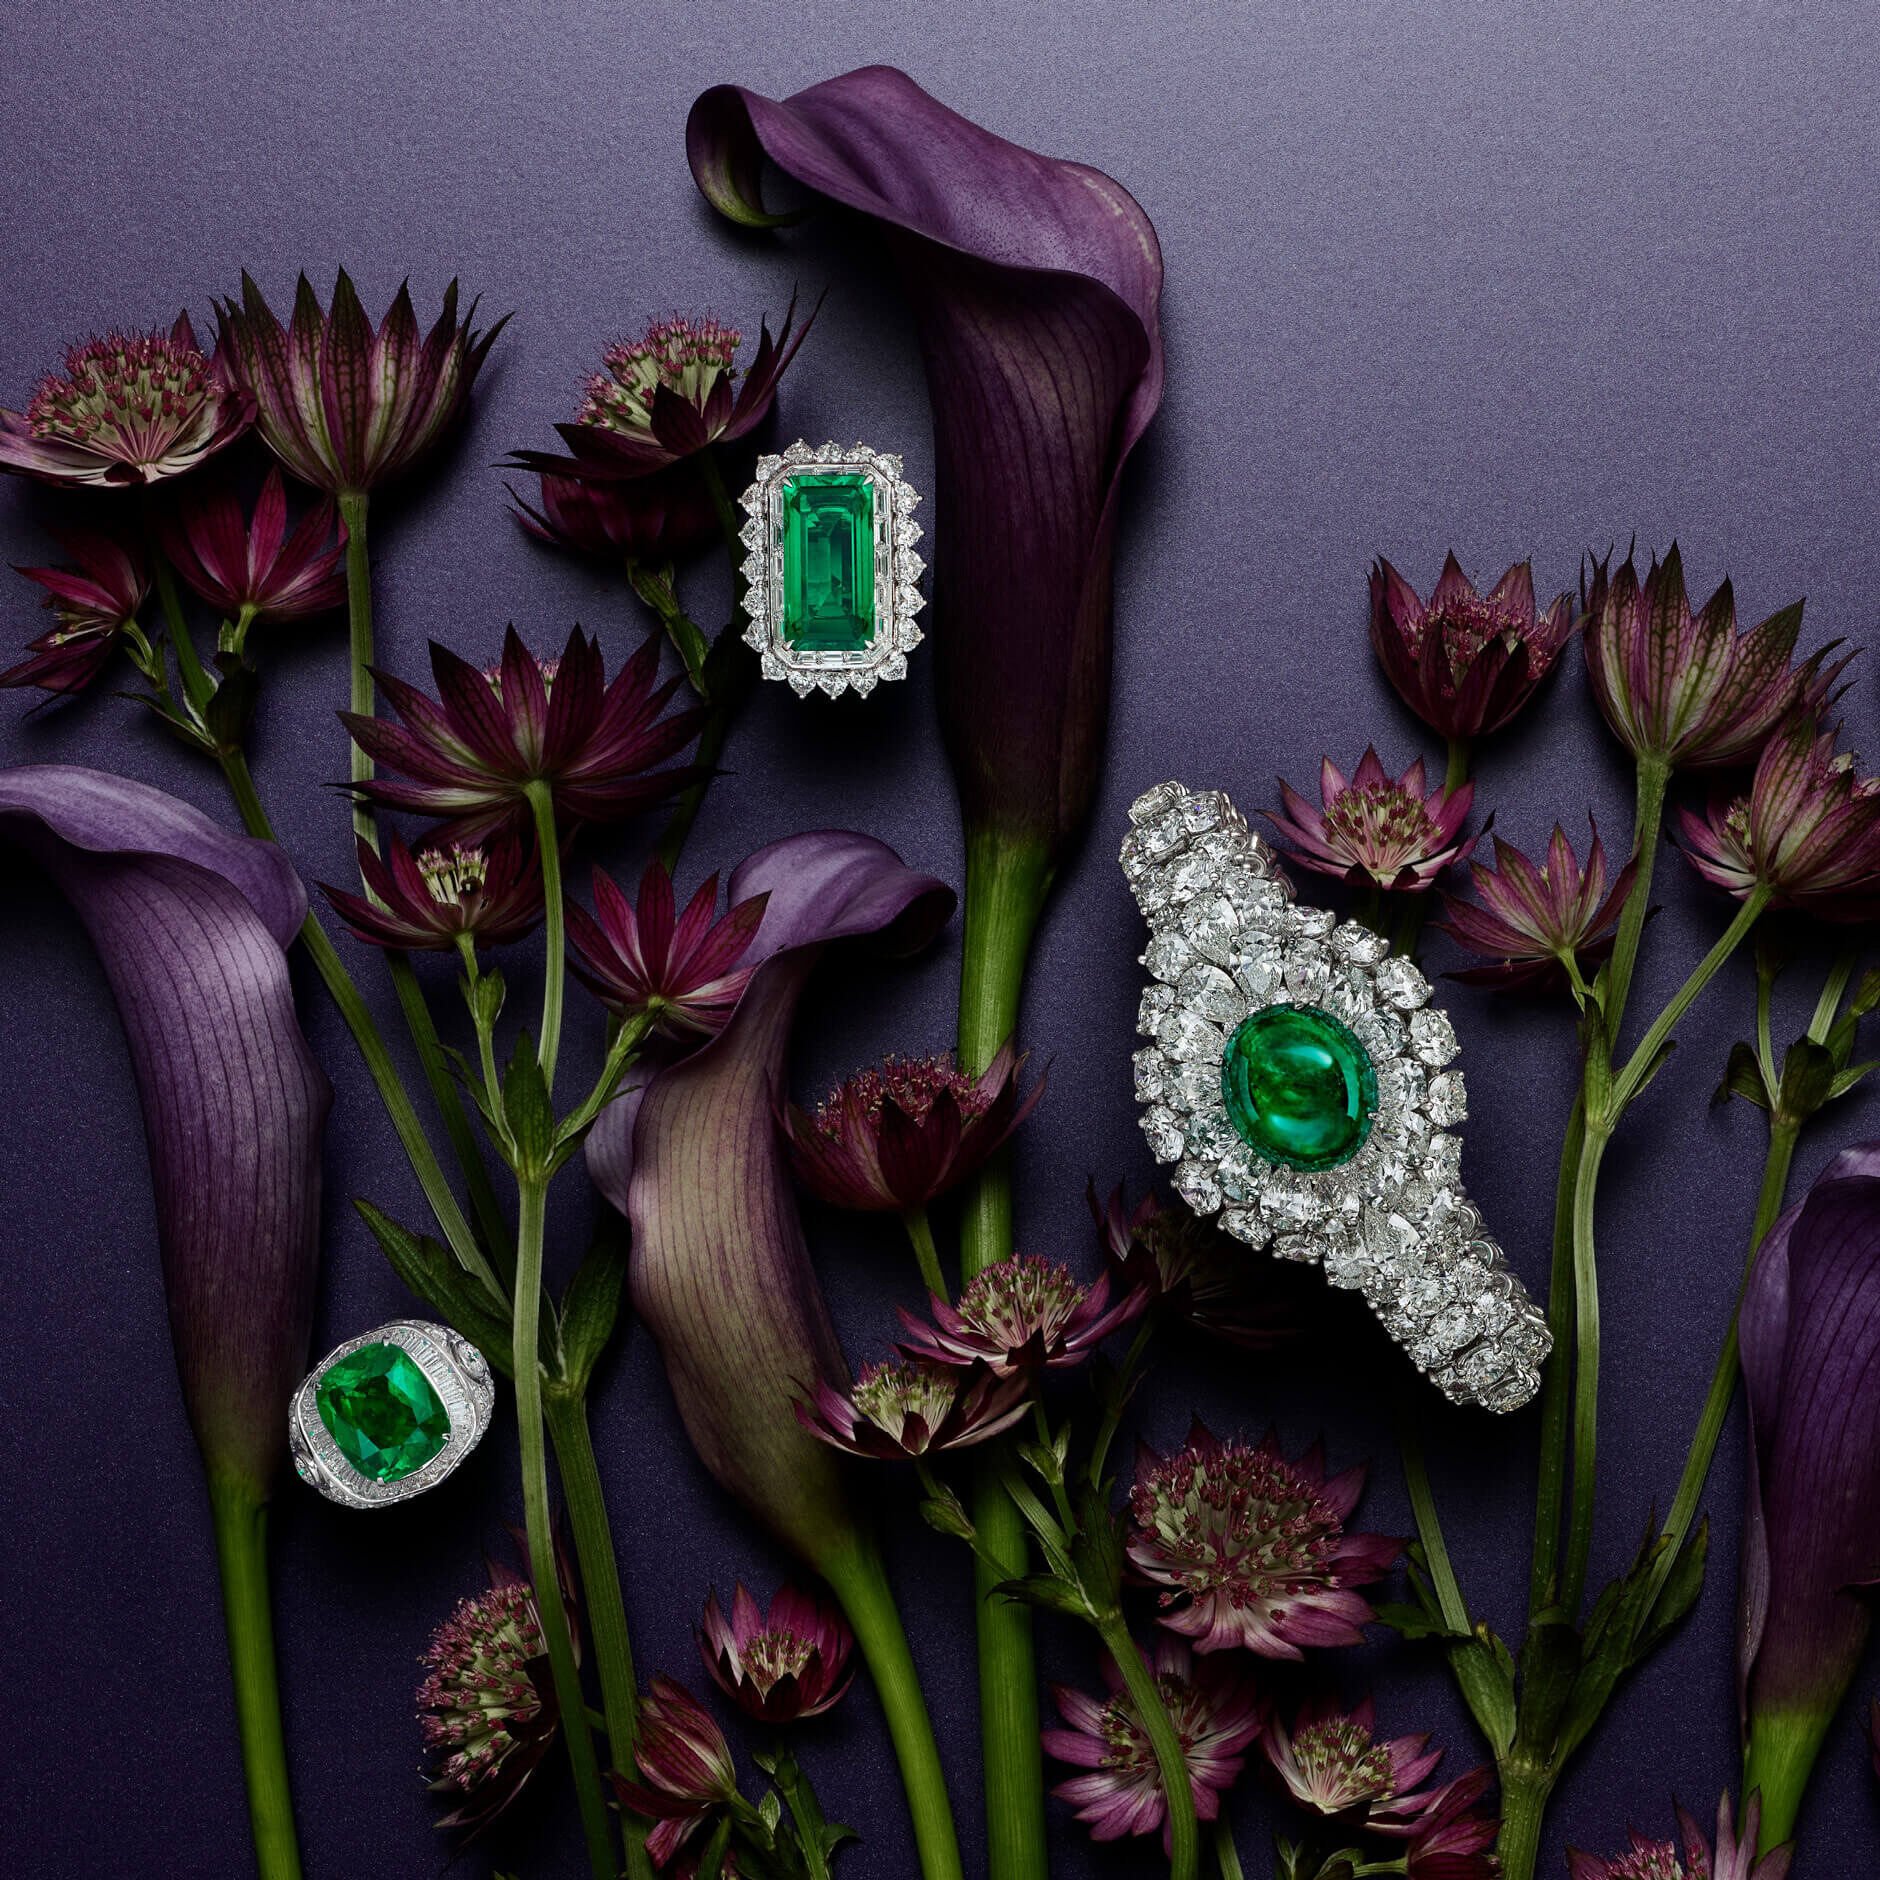 Graff emerald and diamond jewellery including bracelet, ring and earrings with flowers